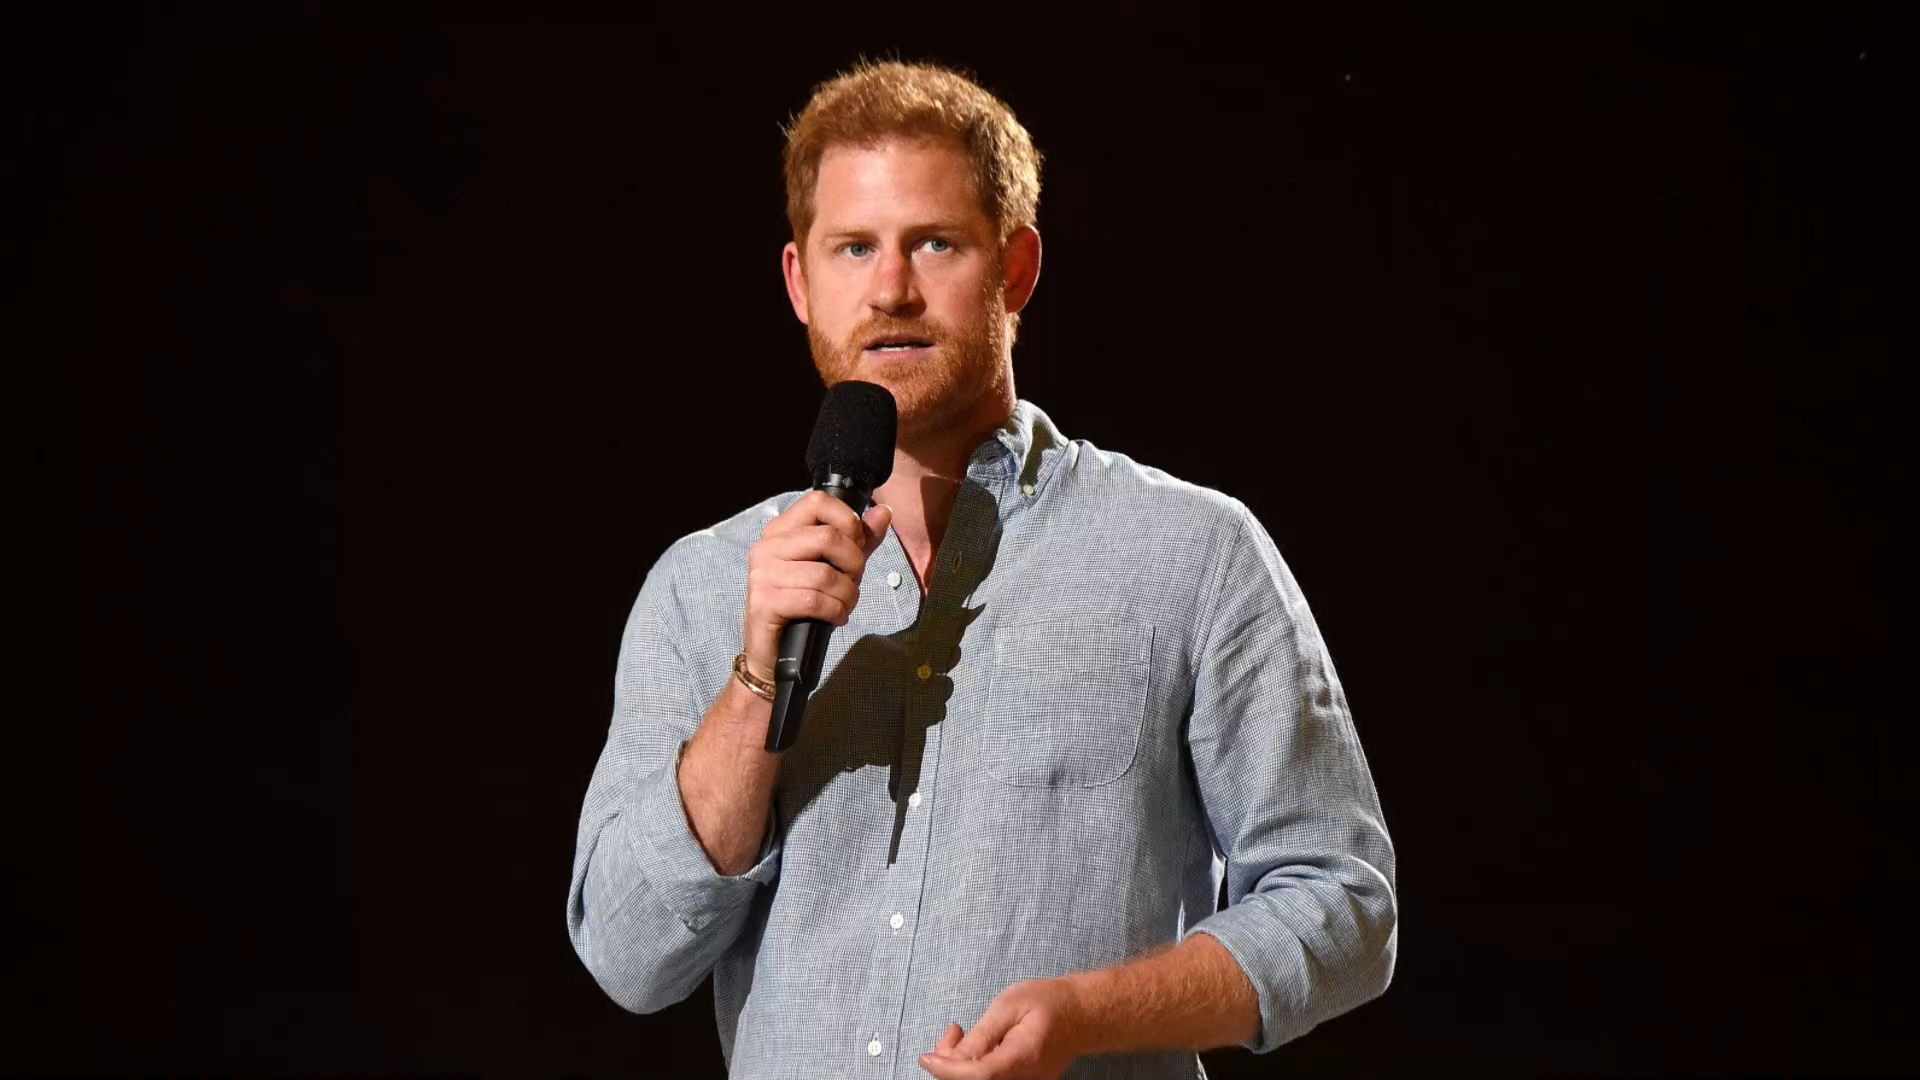 Prince Harry opens up about alcohol abuse in dealing with Diana’s death